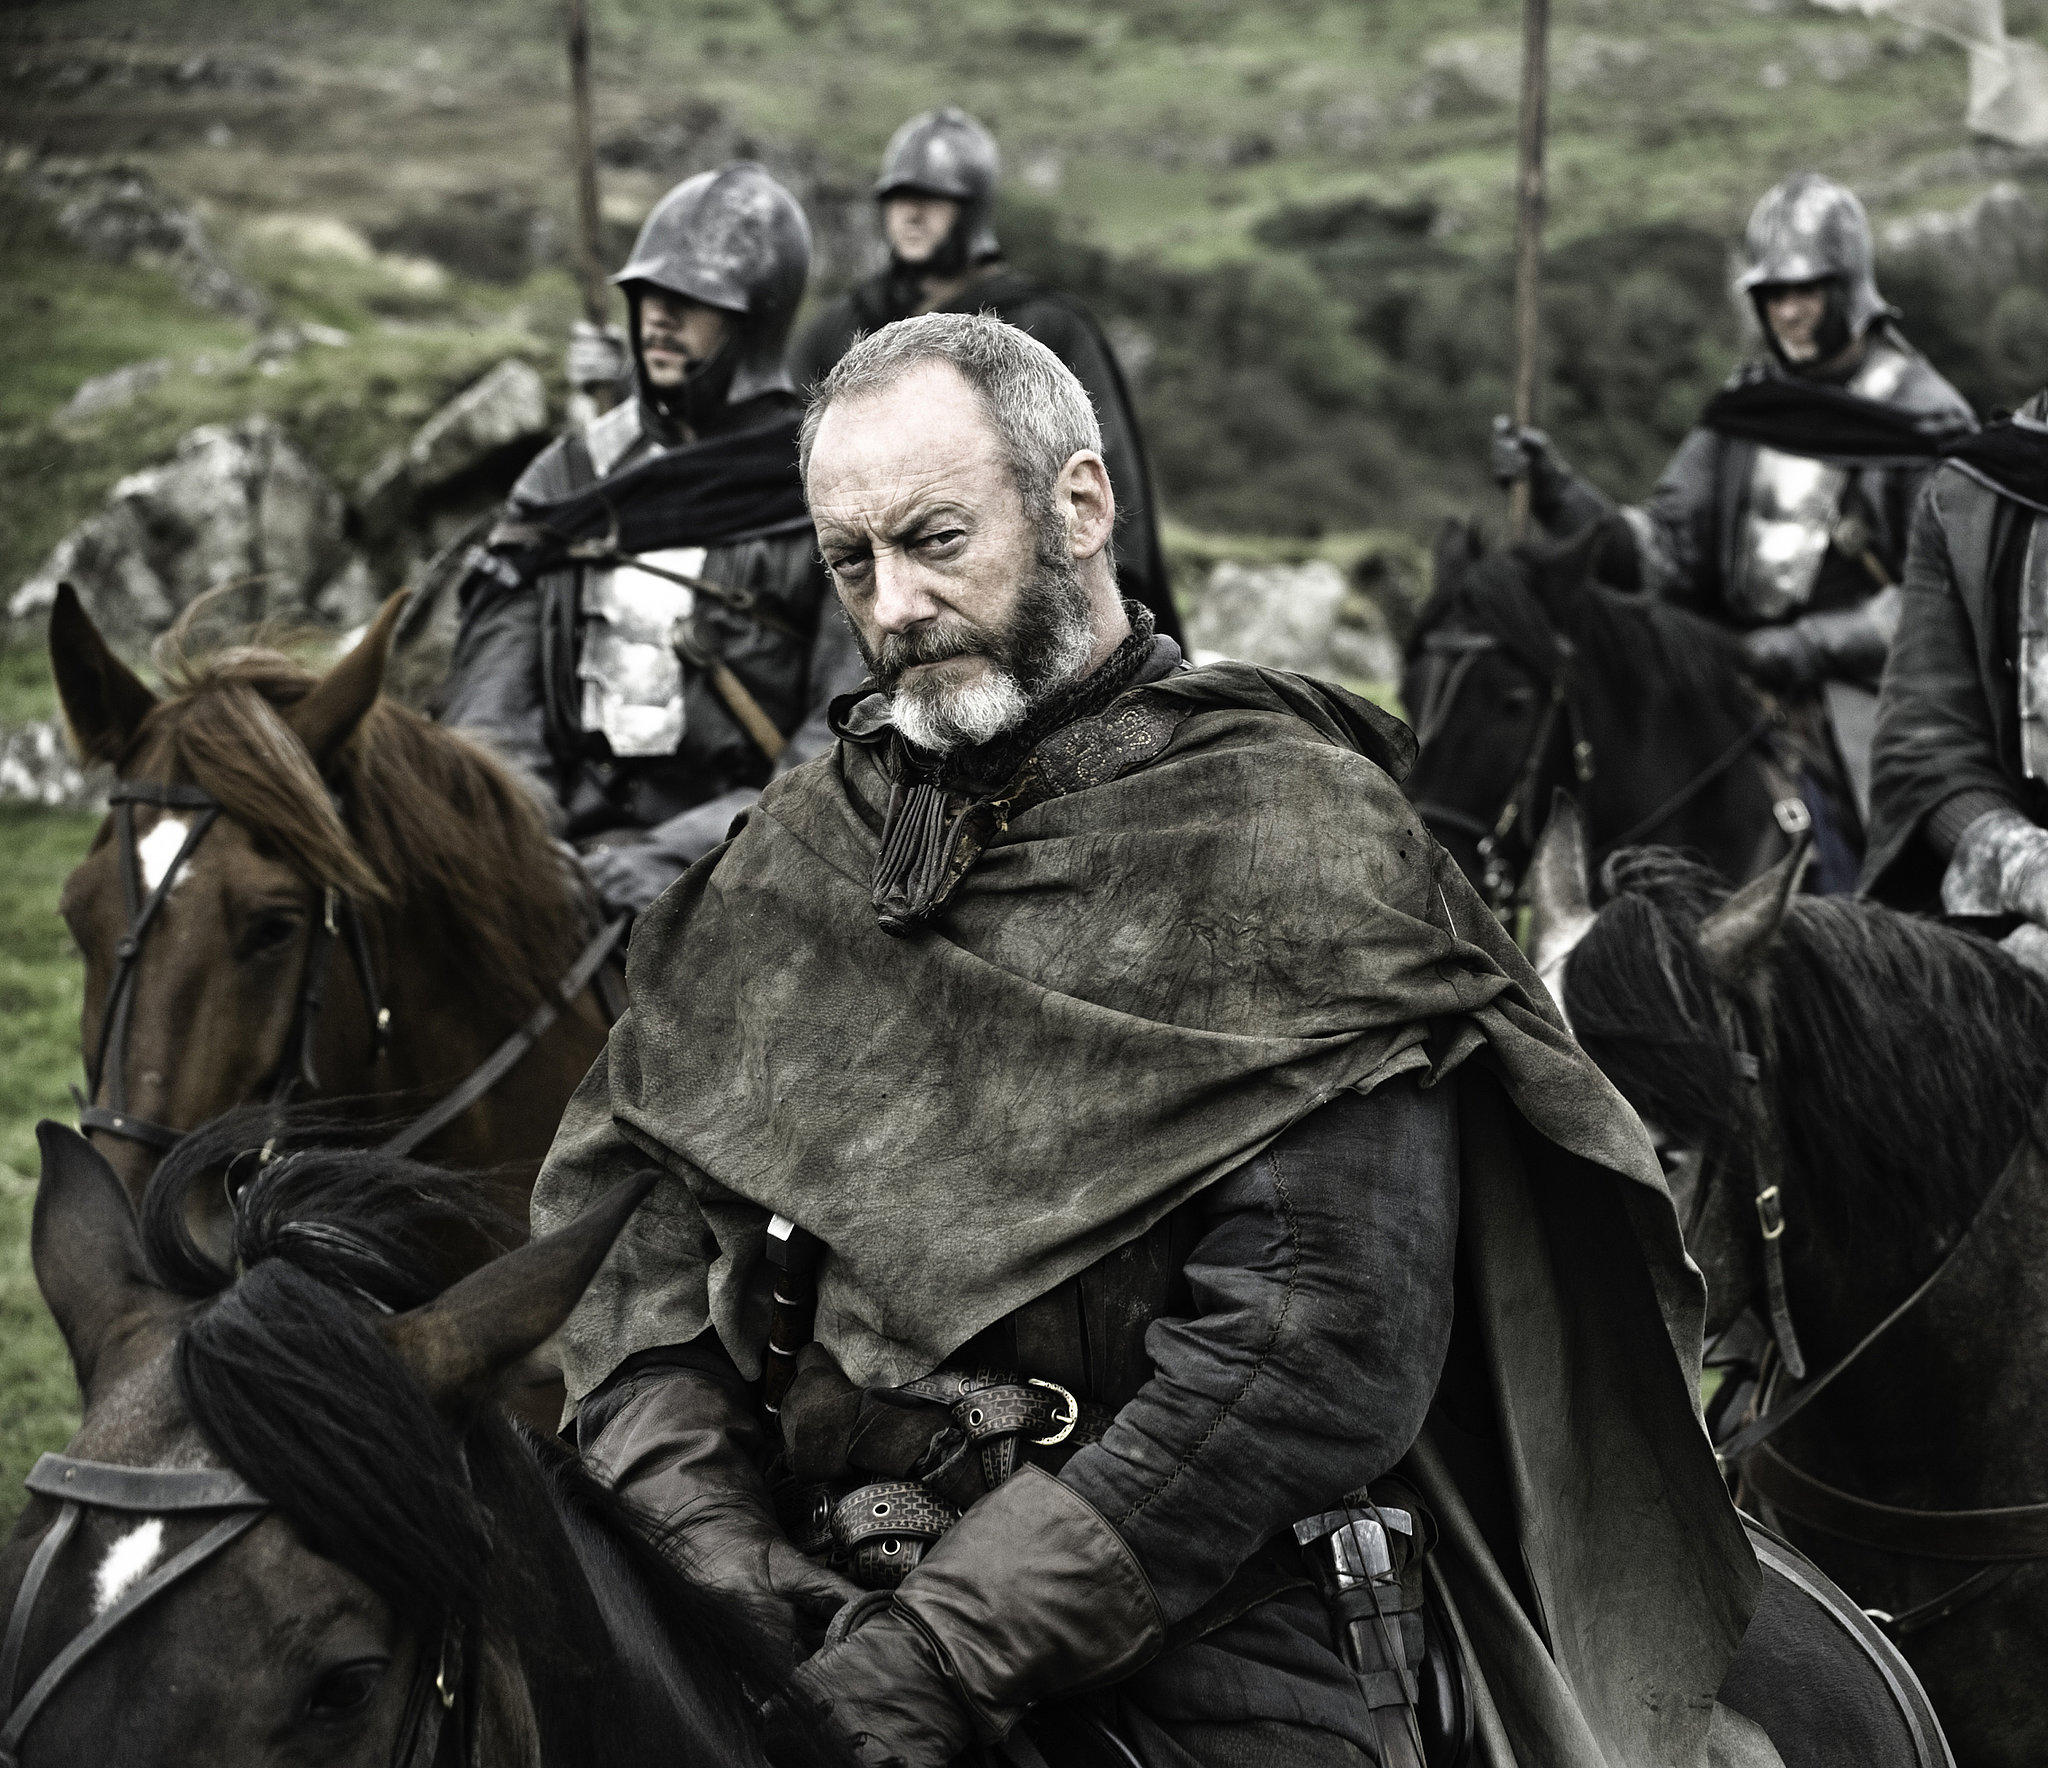 Davos-Seaworth-From-Game-Thrones.jpg